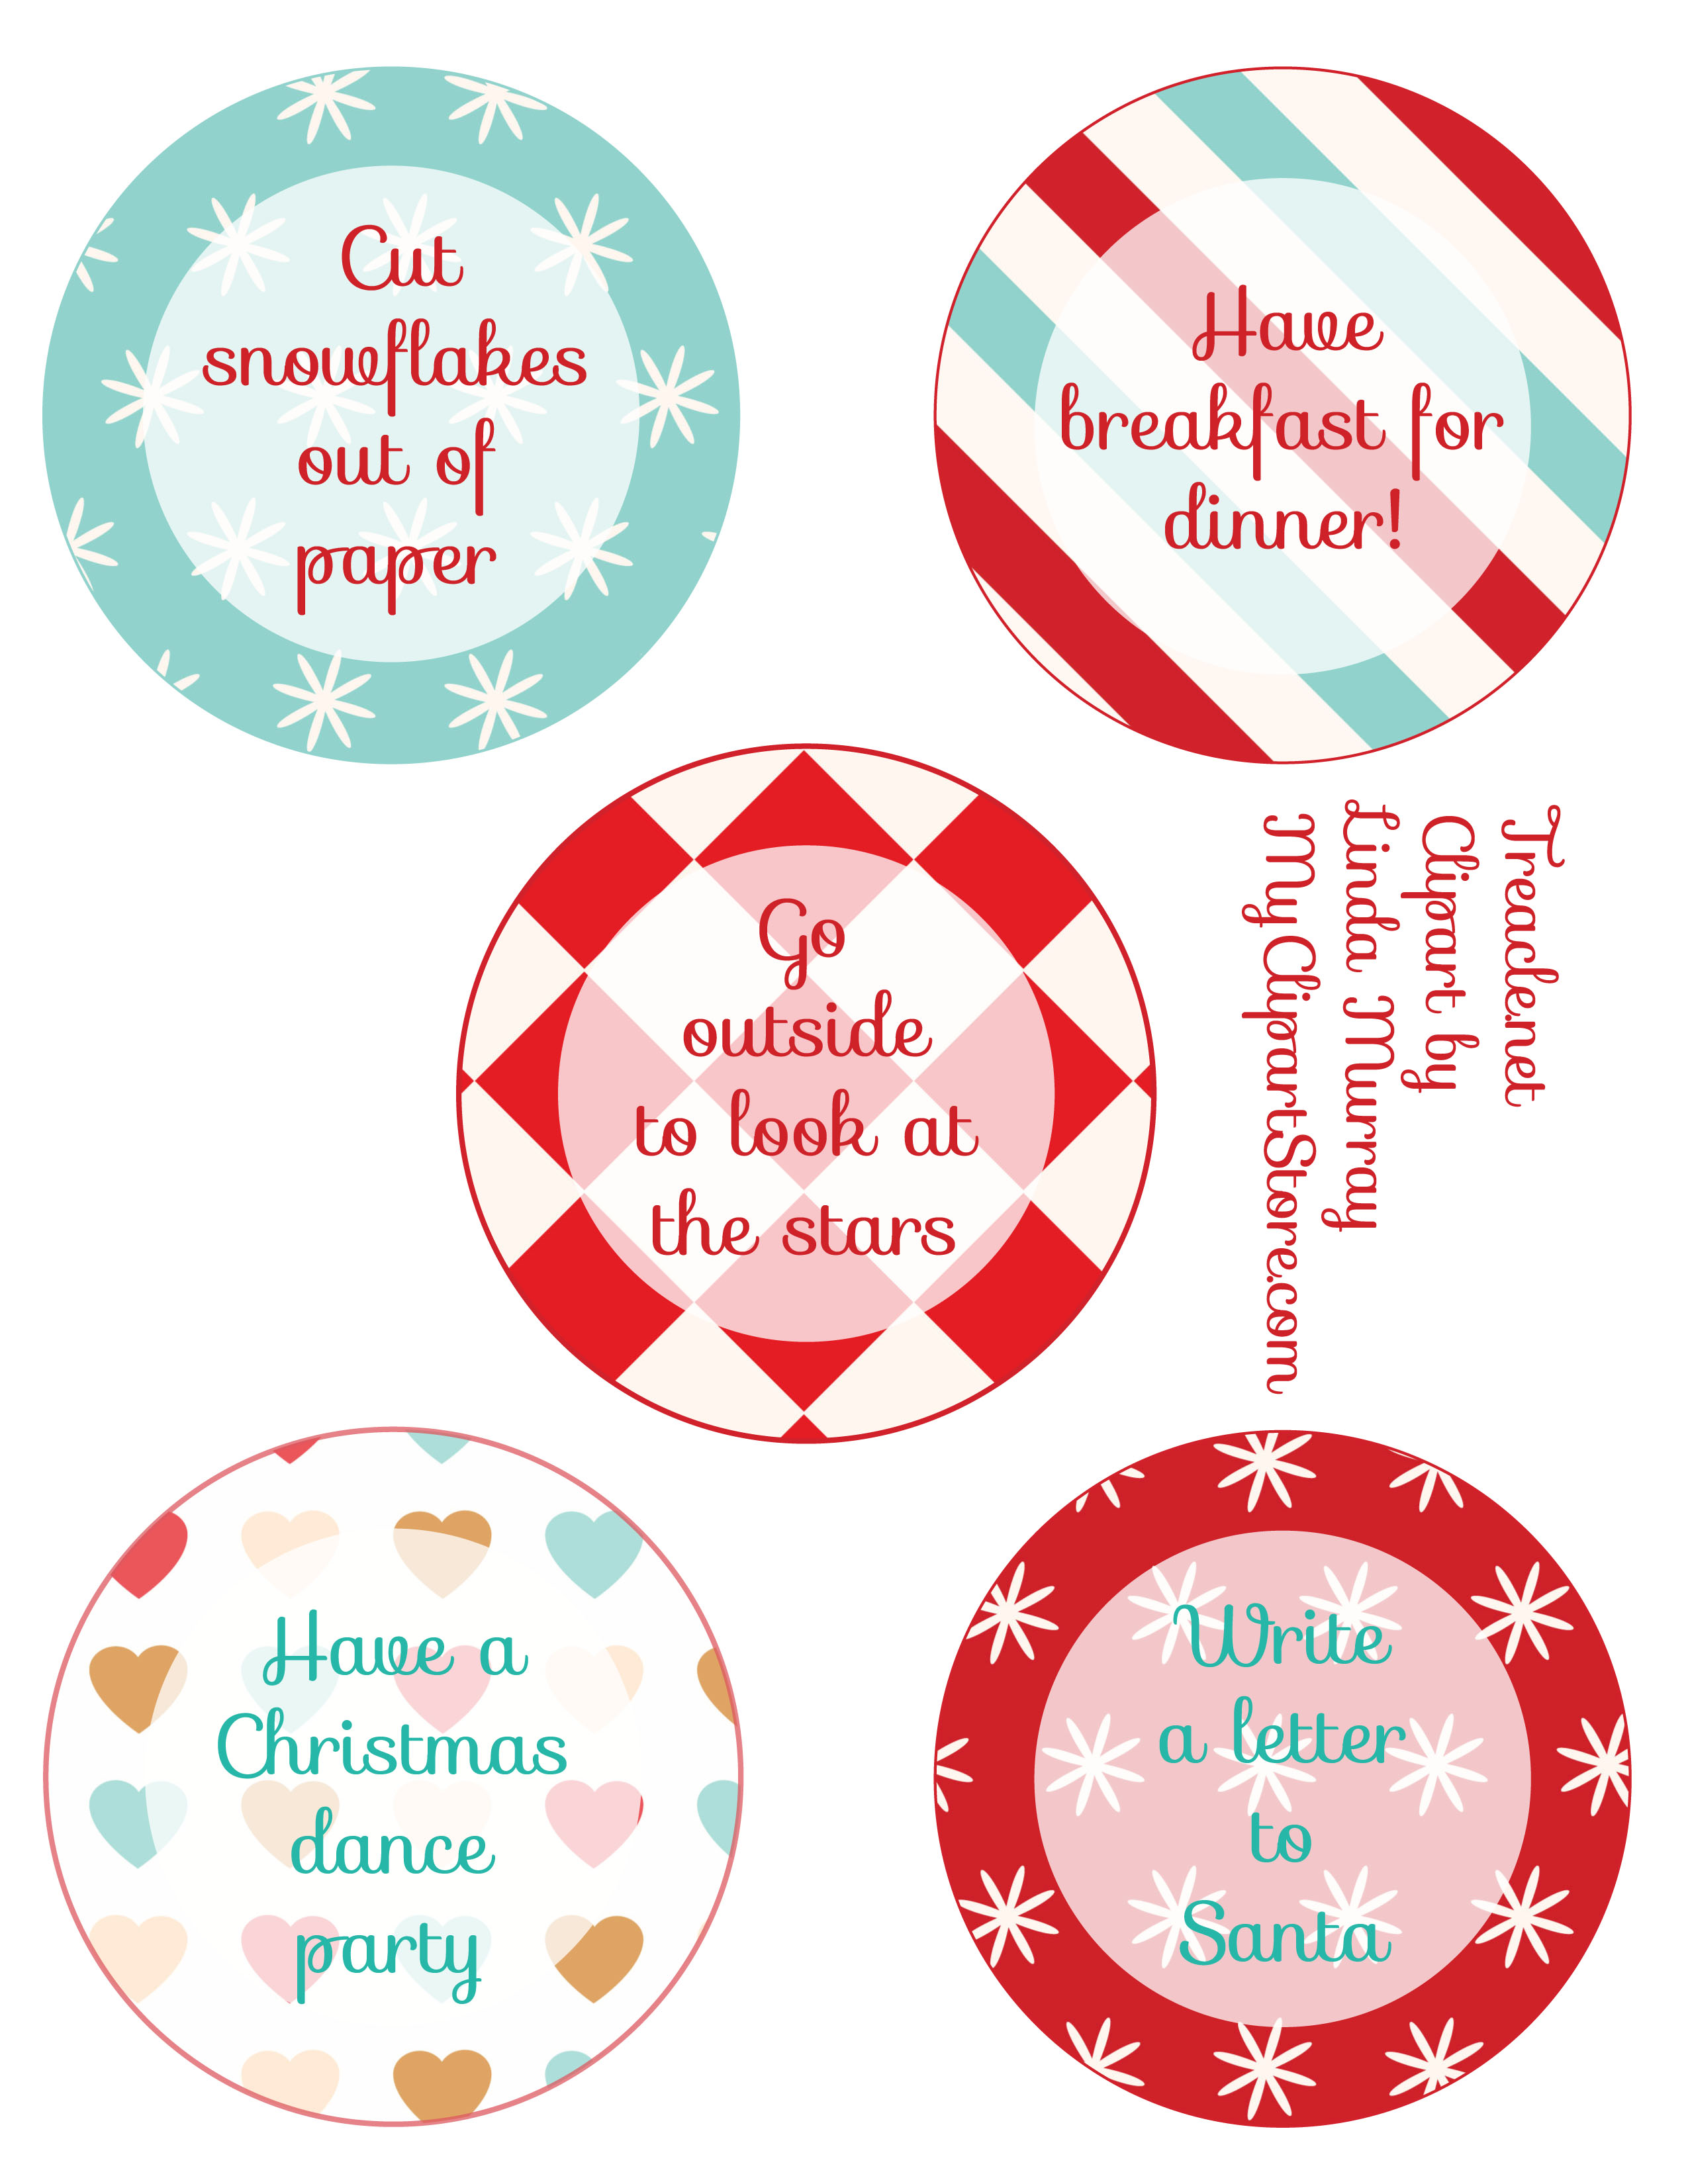 Sparkling Clean House Clipart Design By Treacle Net Clip Art